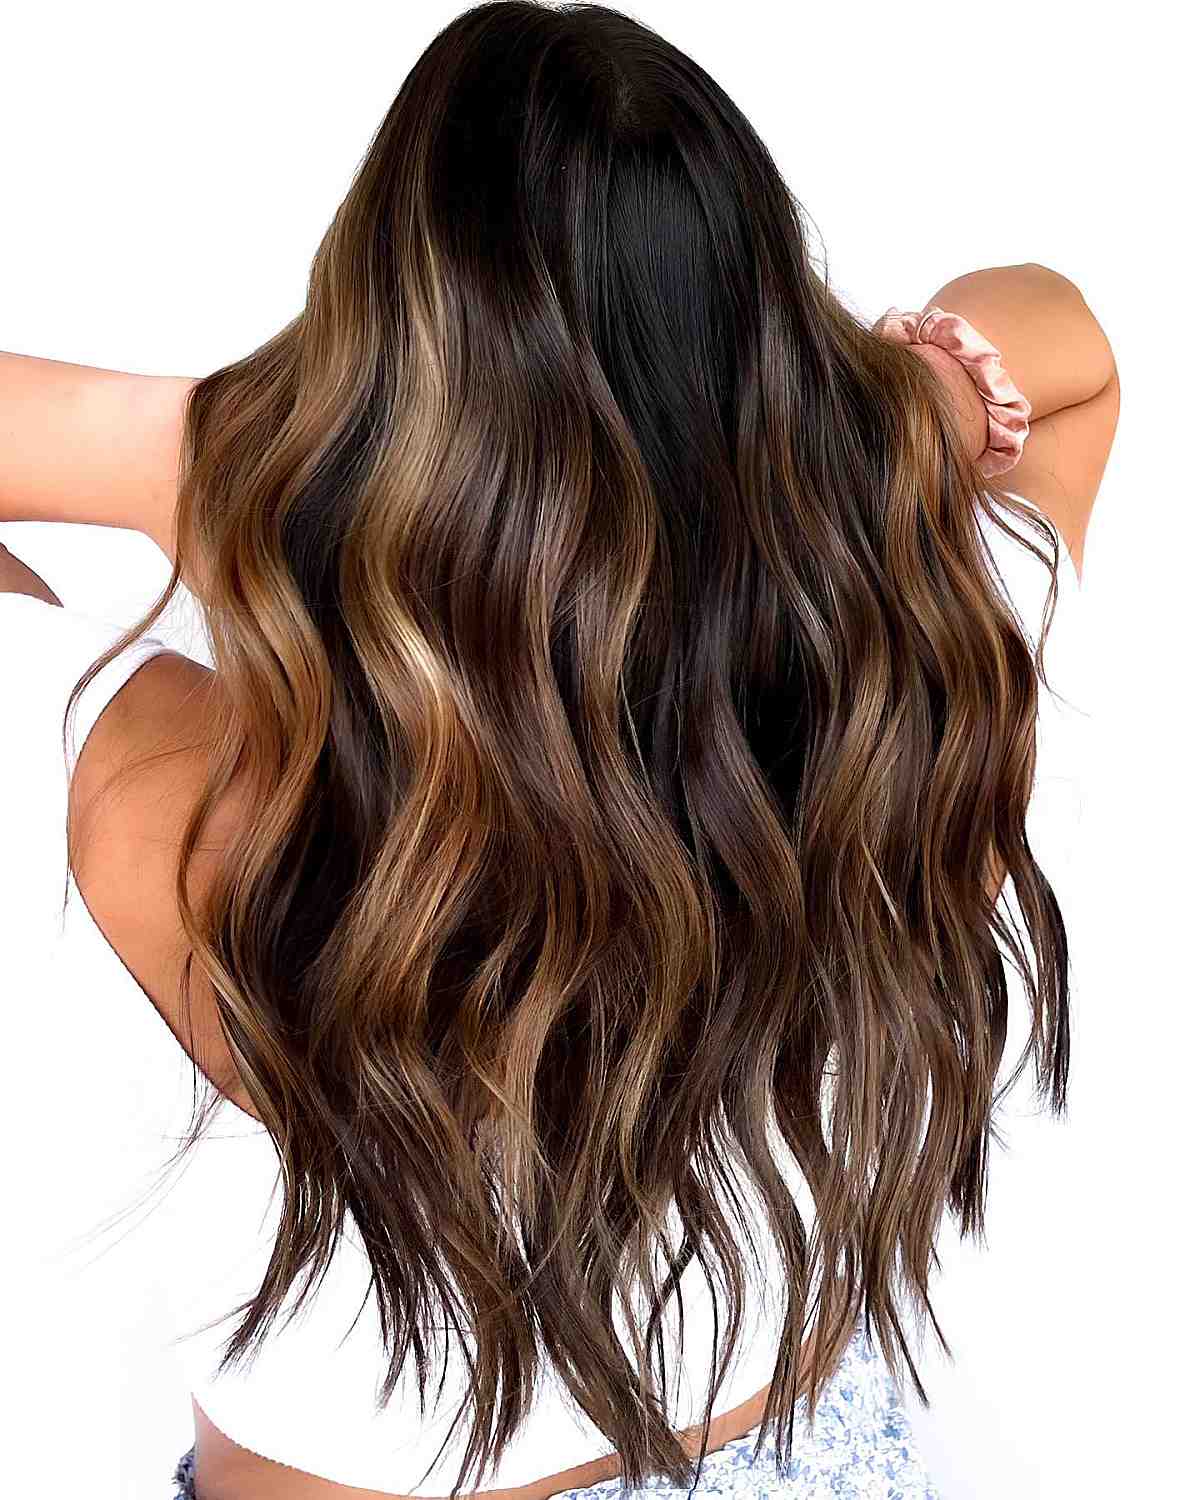 Brown hair with subtle caramel highlights